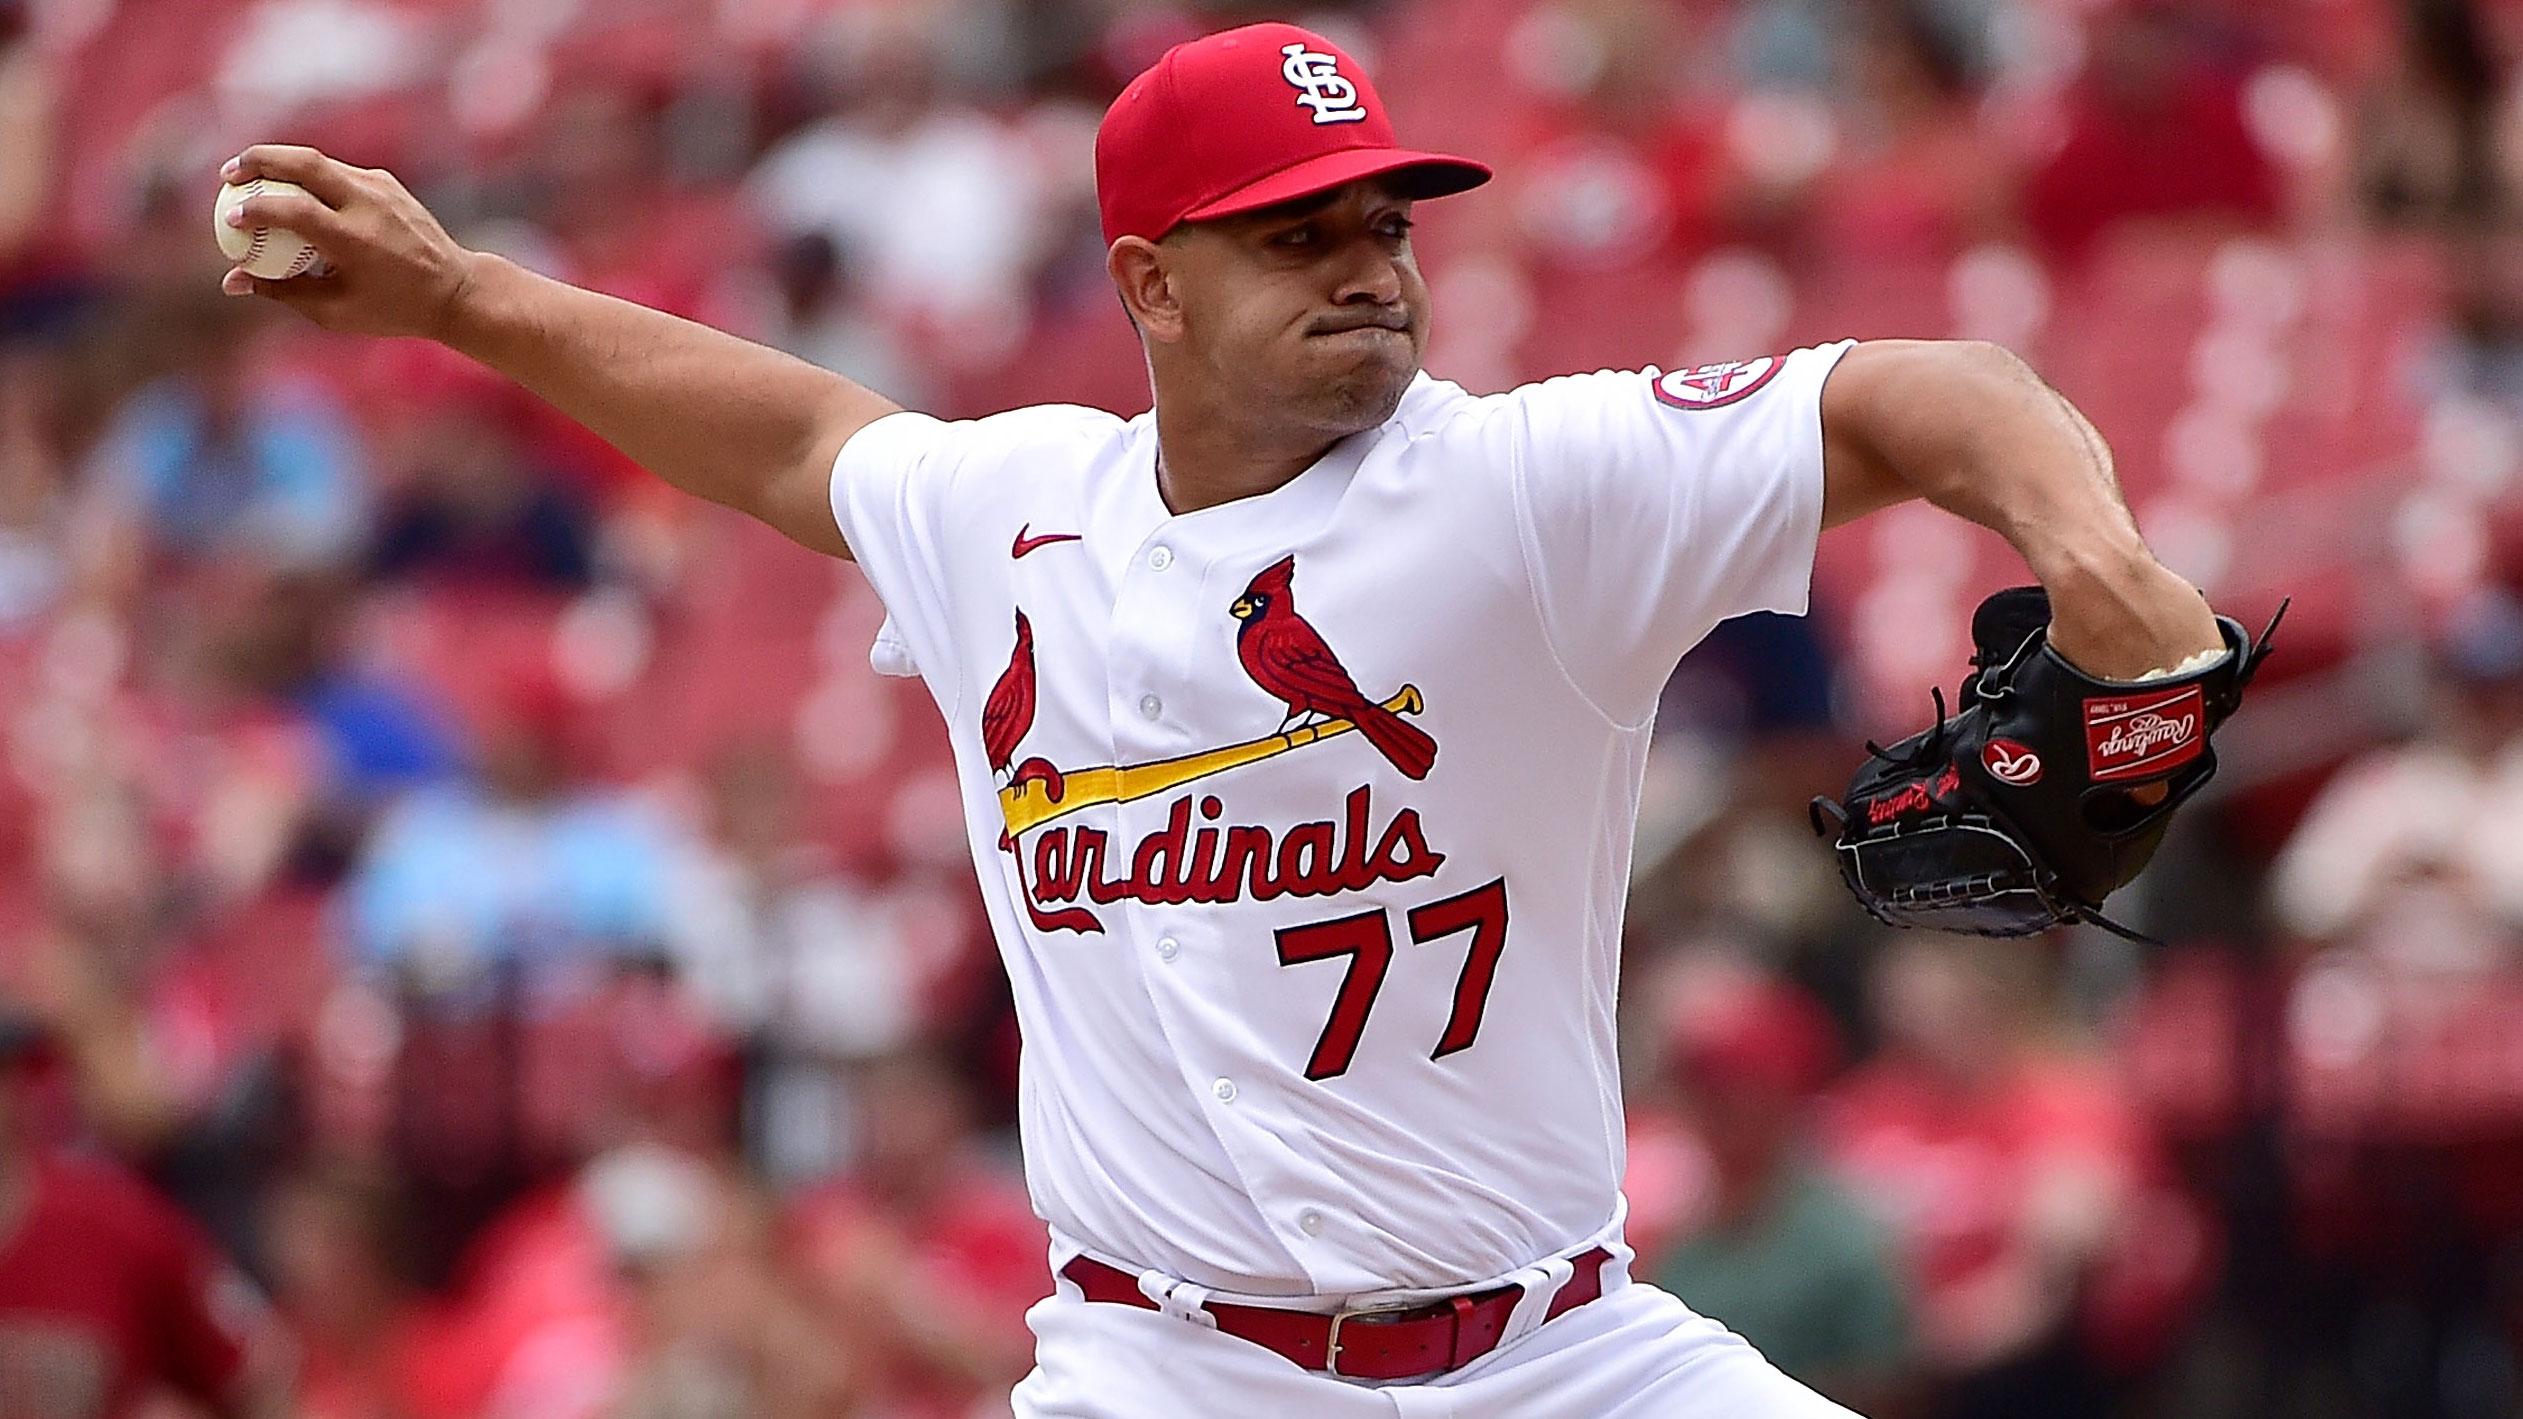 Jun 30, 2021; St. Louis, Missouri, USA; St. Louis Cardinals relief pitcher Roel Ramirez (77) pitches during the eighth inning against the Arizona Diamondbacks at Busch Stadium. / Jeff Curry-USA TODAY Sports